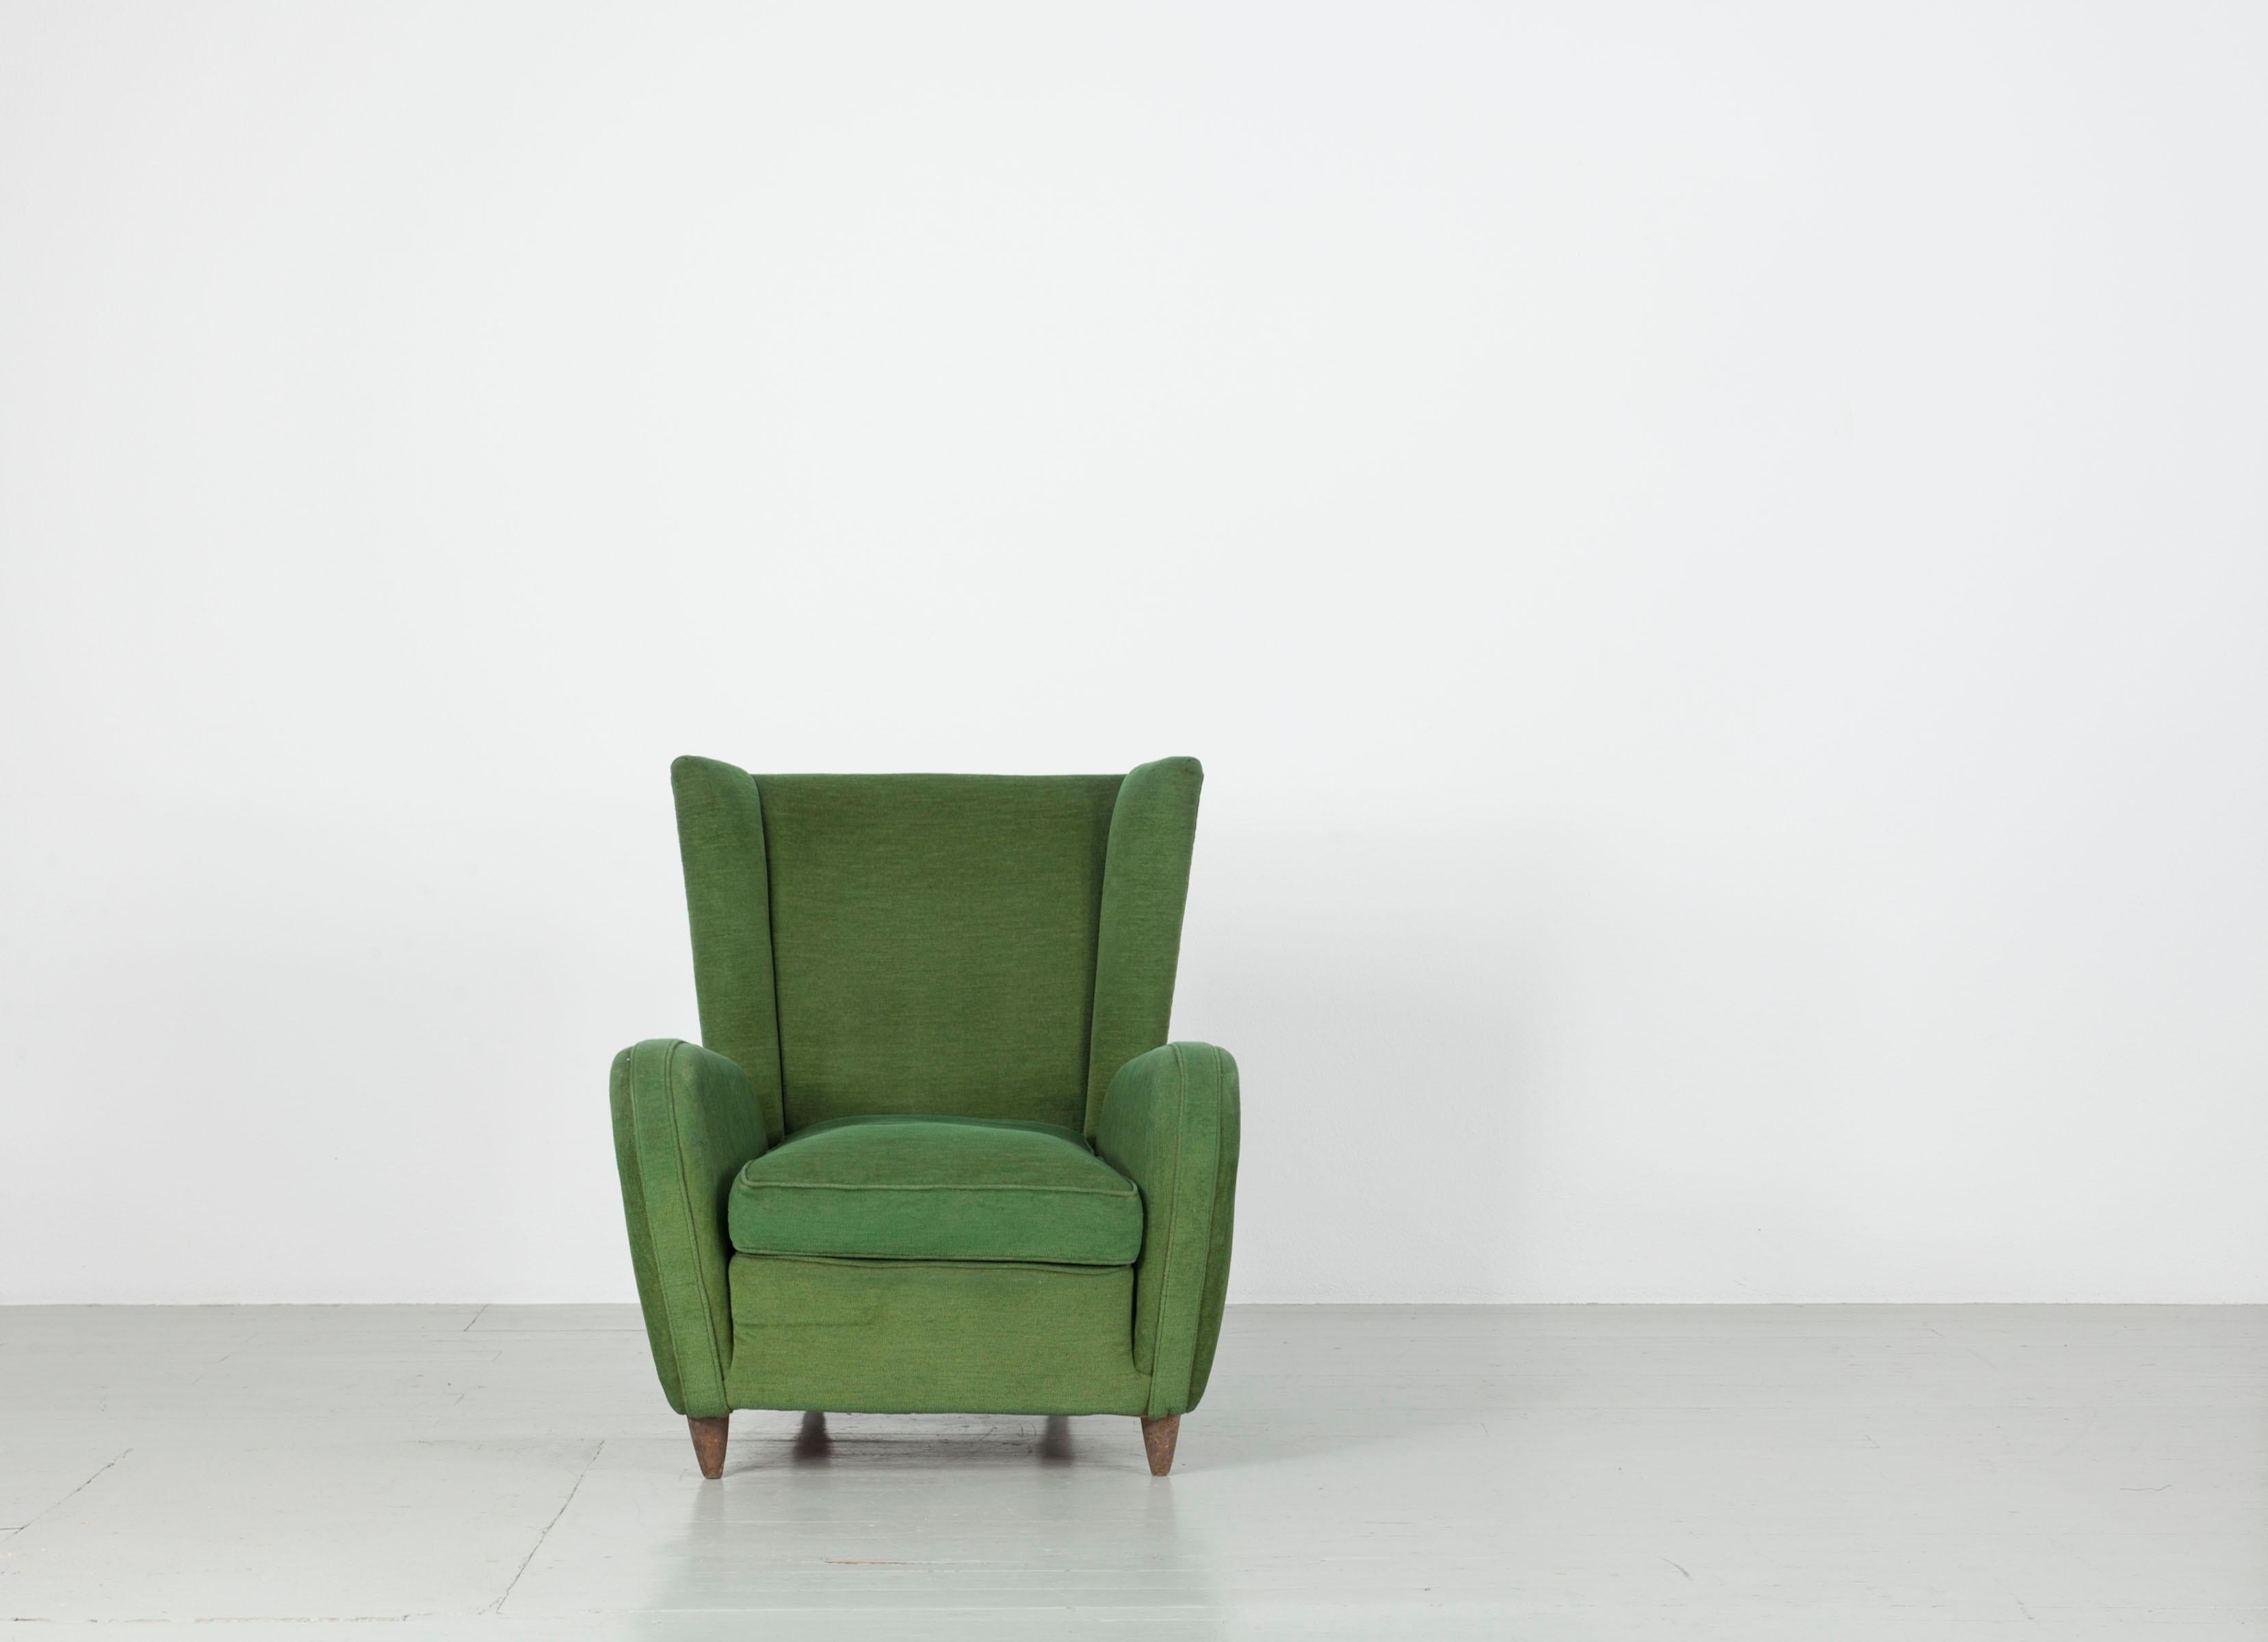 Set of two green Paolo Buffa armchairs, original upholstery, Italy, 1950s.